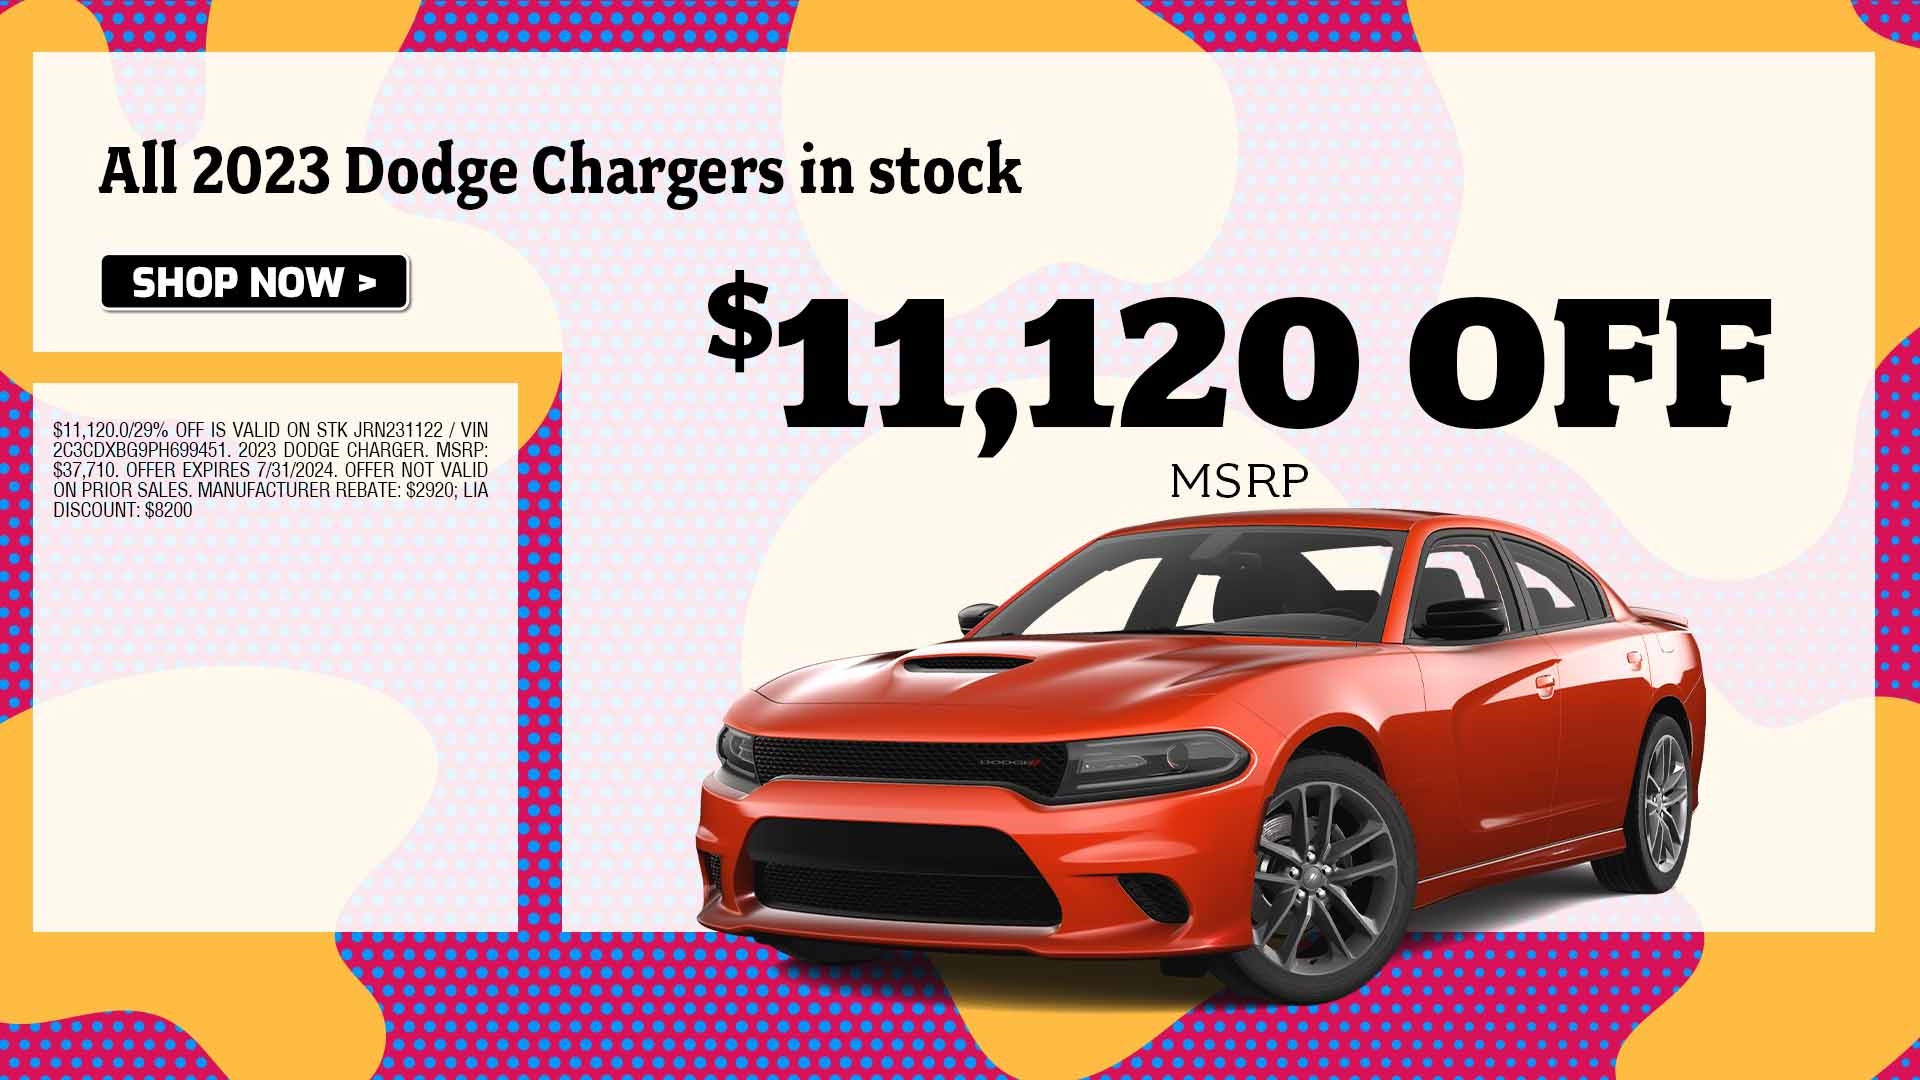 charger purchase special